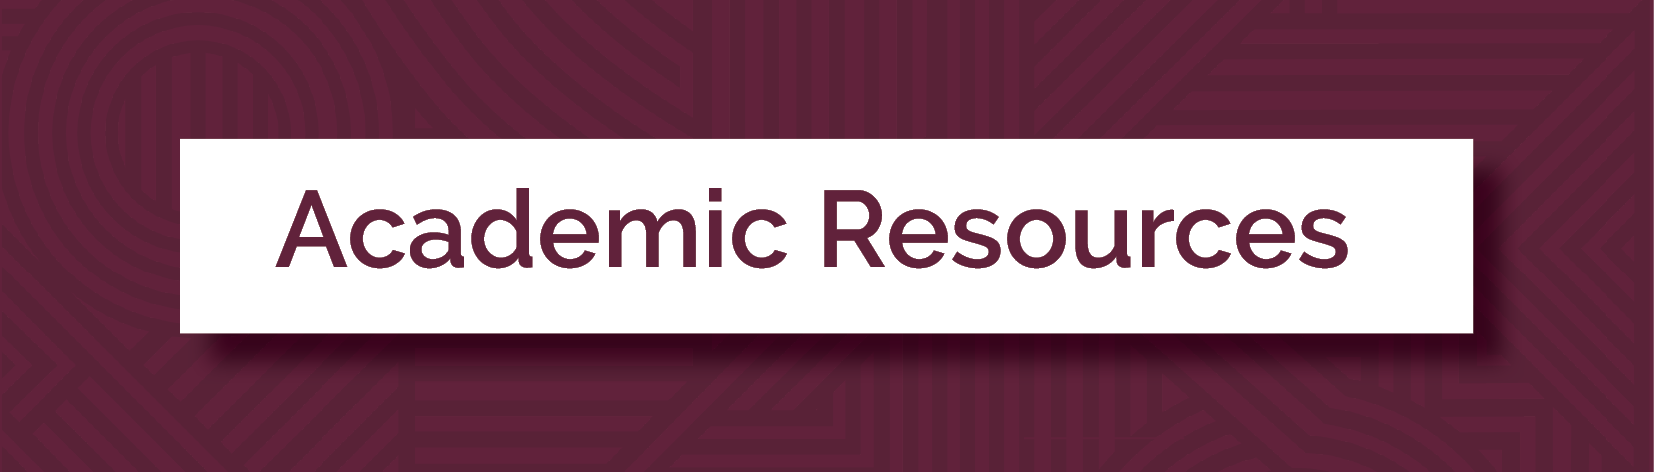 Banner Academic resources page.png